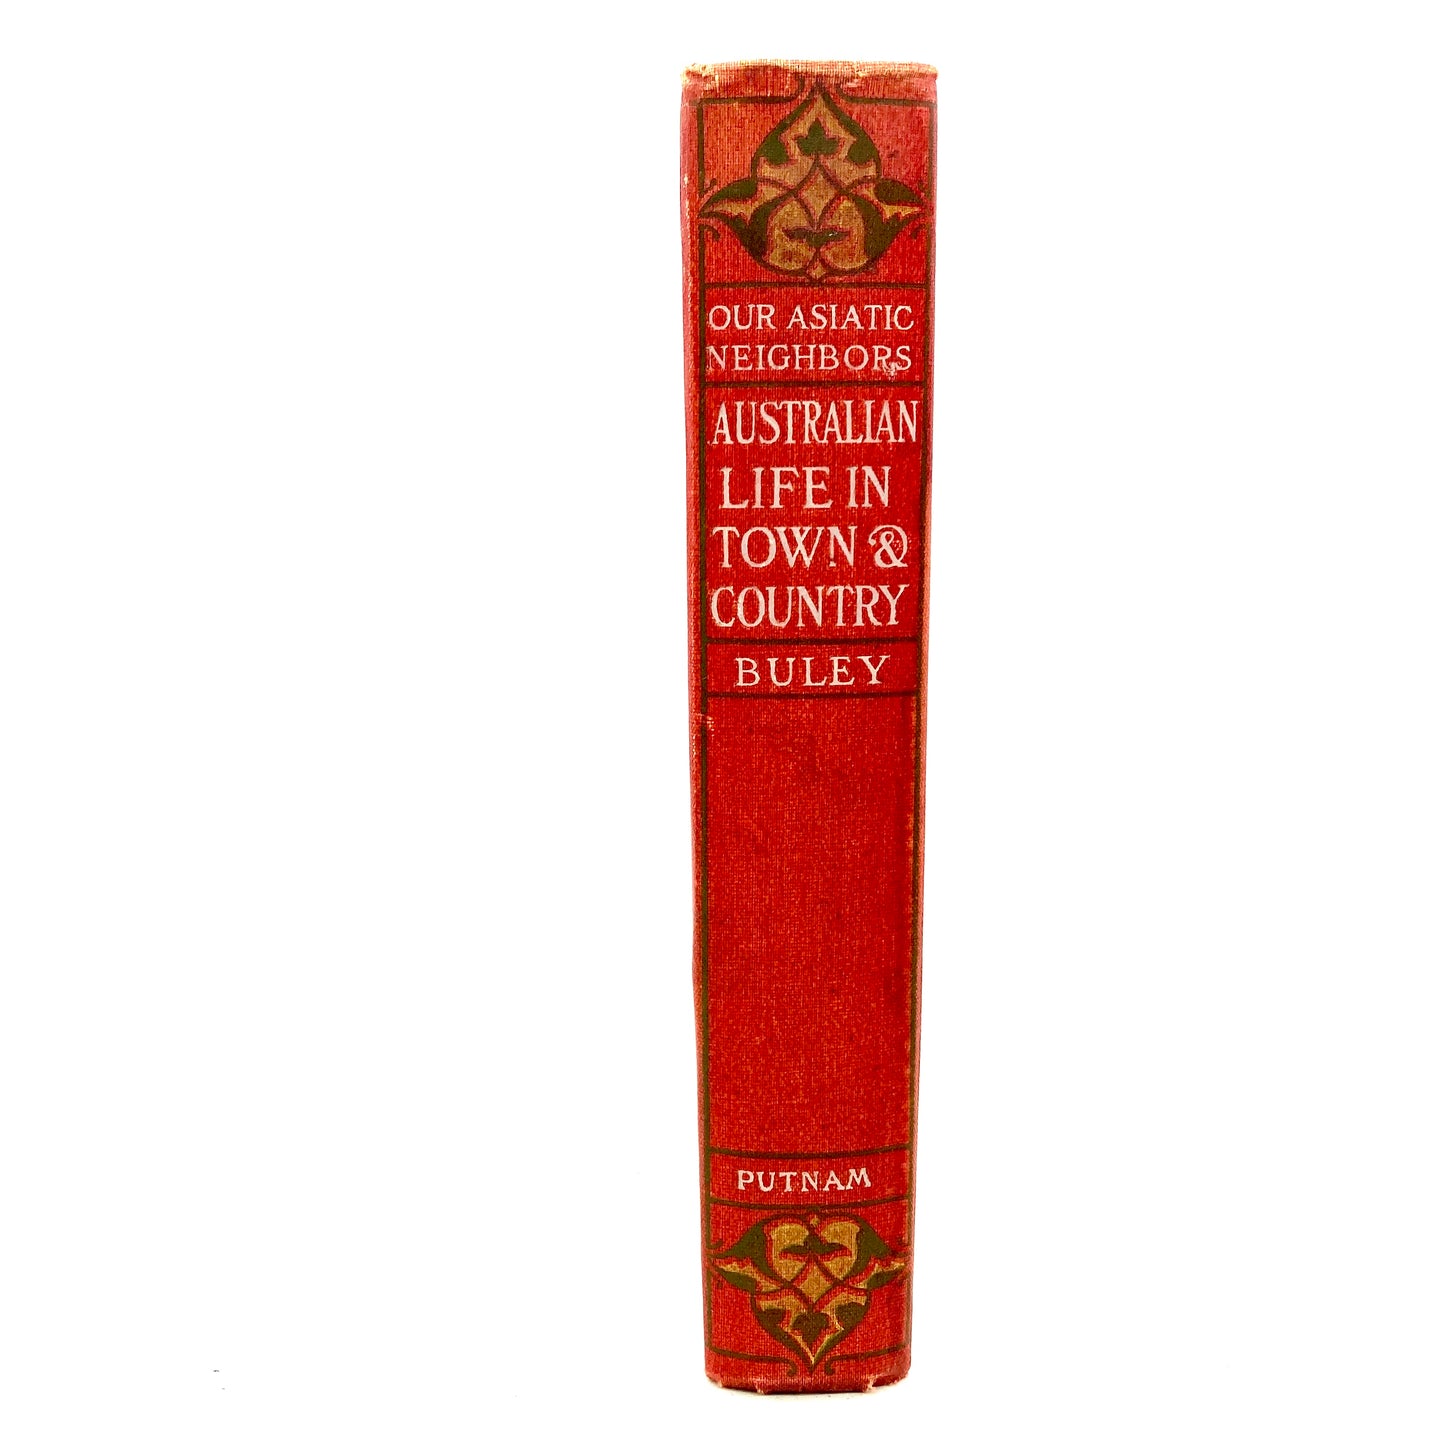 BULEY, E.C. "Australian Life in Town & Country" [G.P. Putnam's Sons, 1905] - Buzz Bookstore